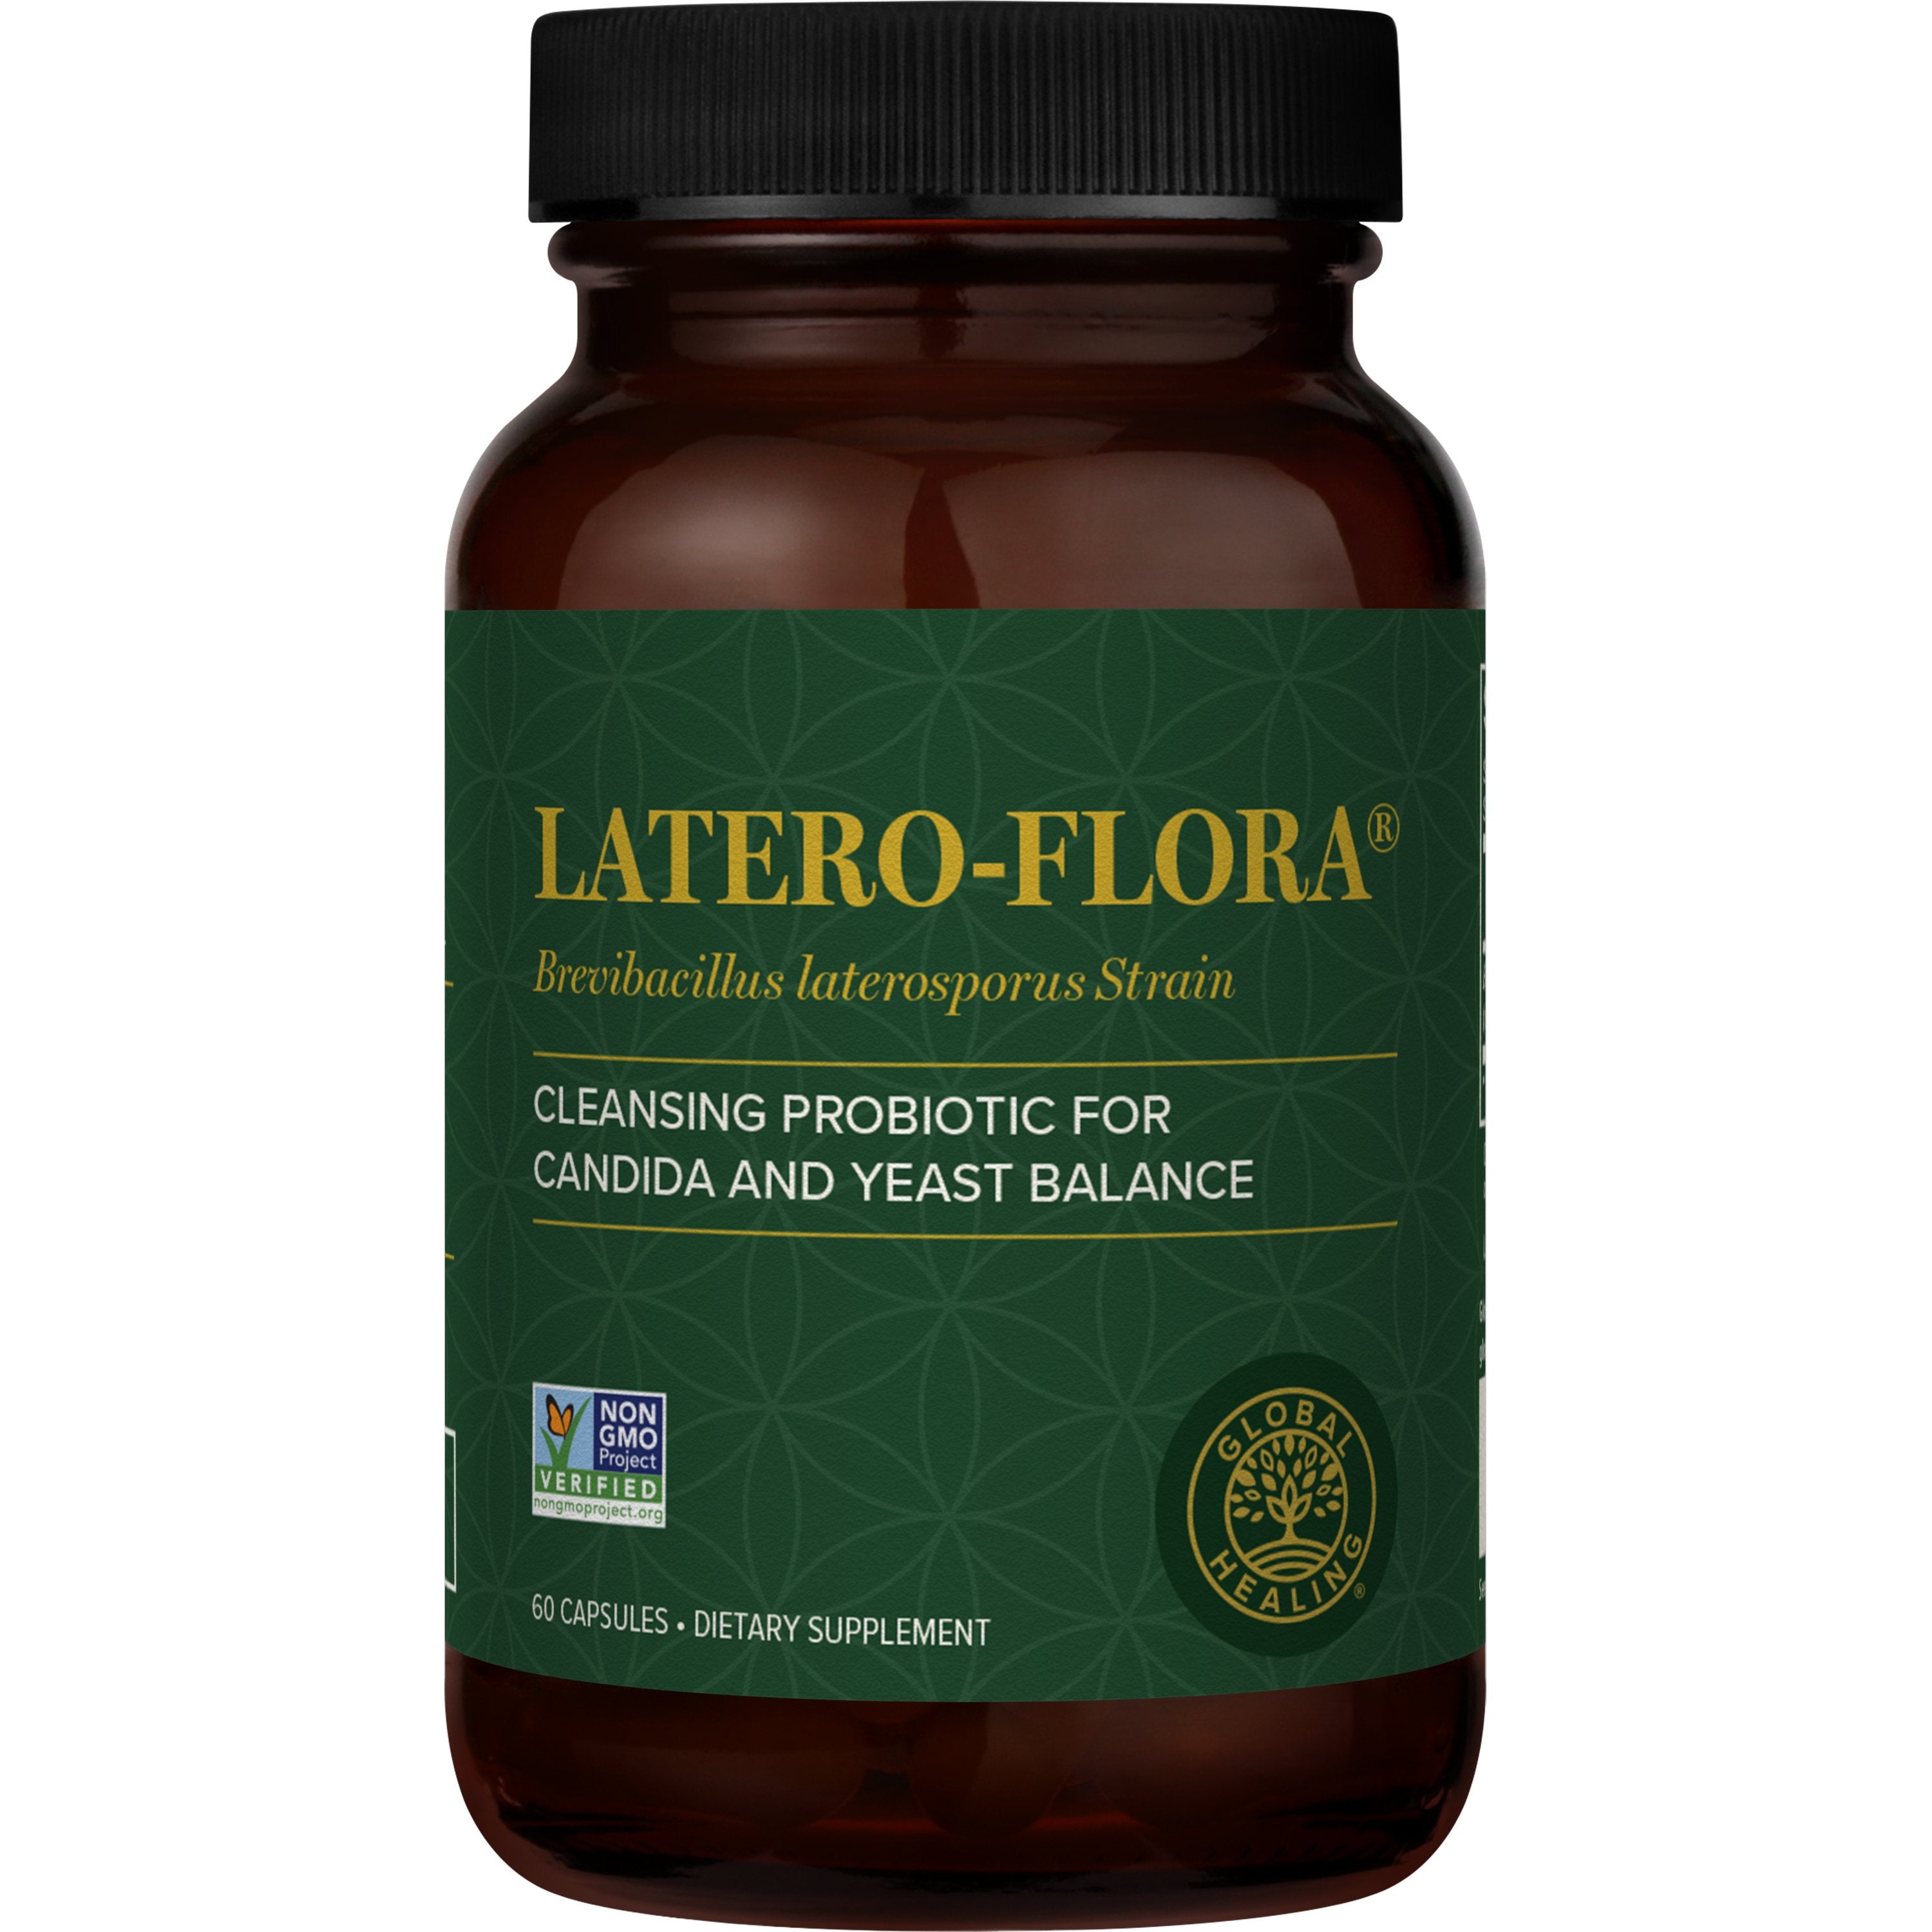 A bottle of Latero-Flora Probiotic Supplement for Healthy Digestion from Global Healing.